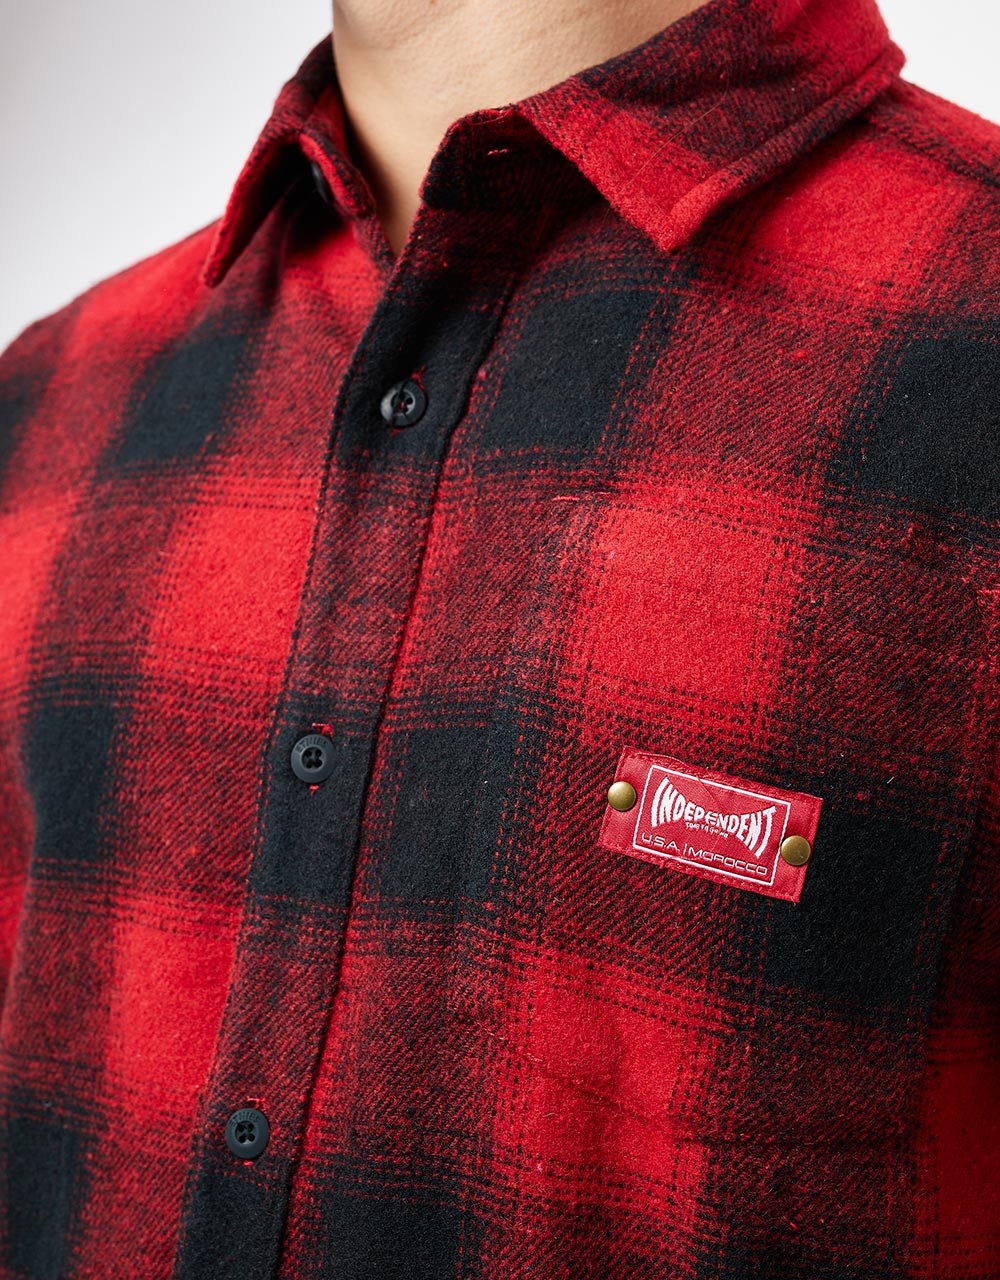 Etnies x Independent Flannel Shirt - Red